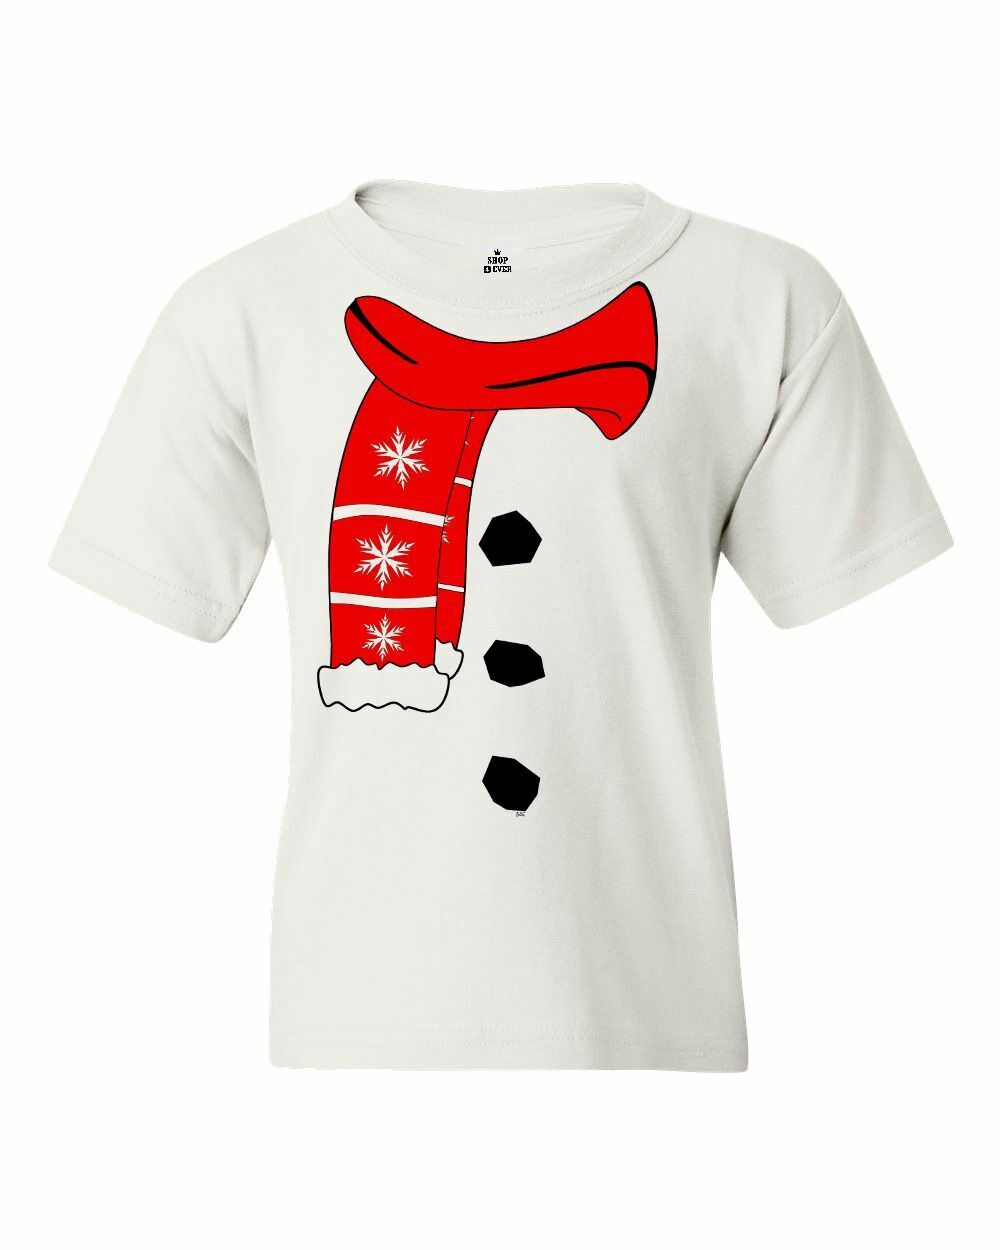 Snowflake Red Scarf Snowman Max 61% OFF Youth's Christmas Costu Indianapolis Mall T-Shirt Cute